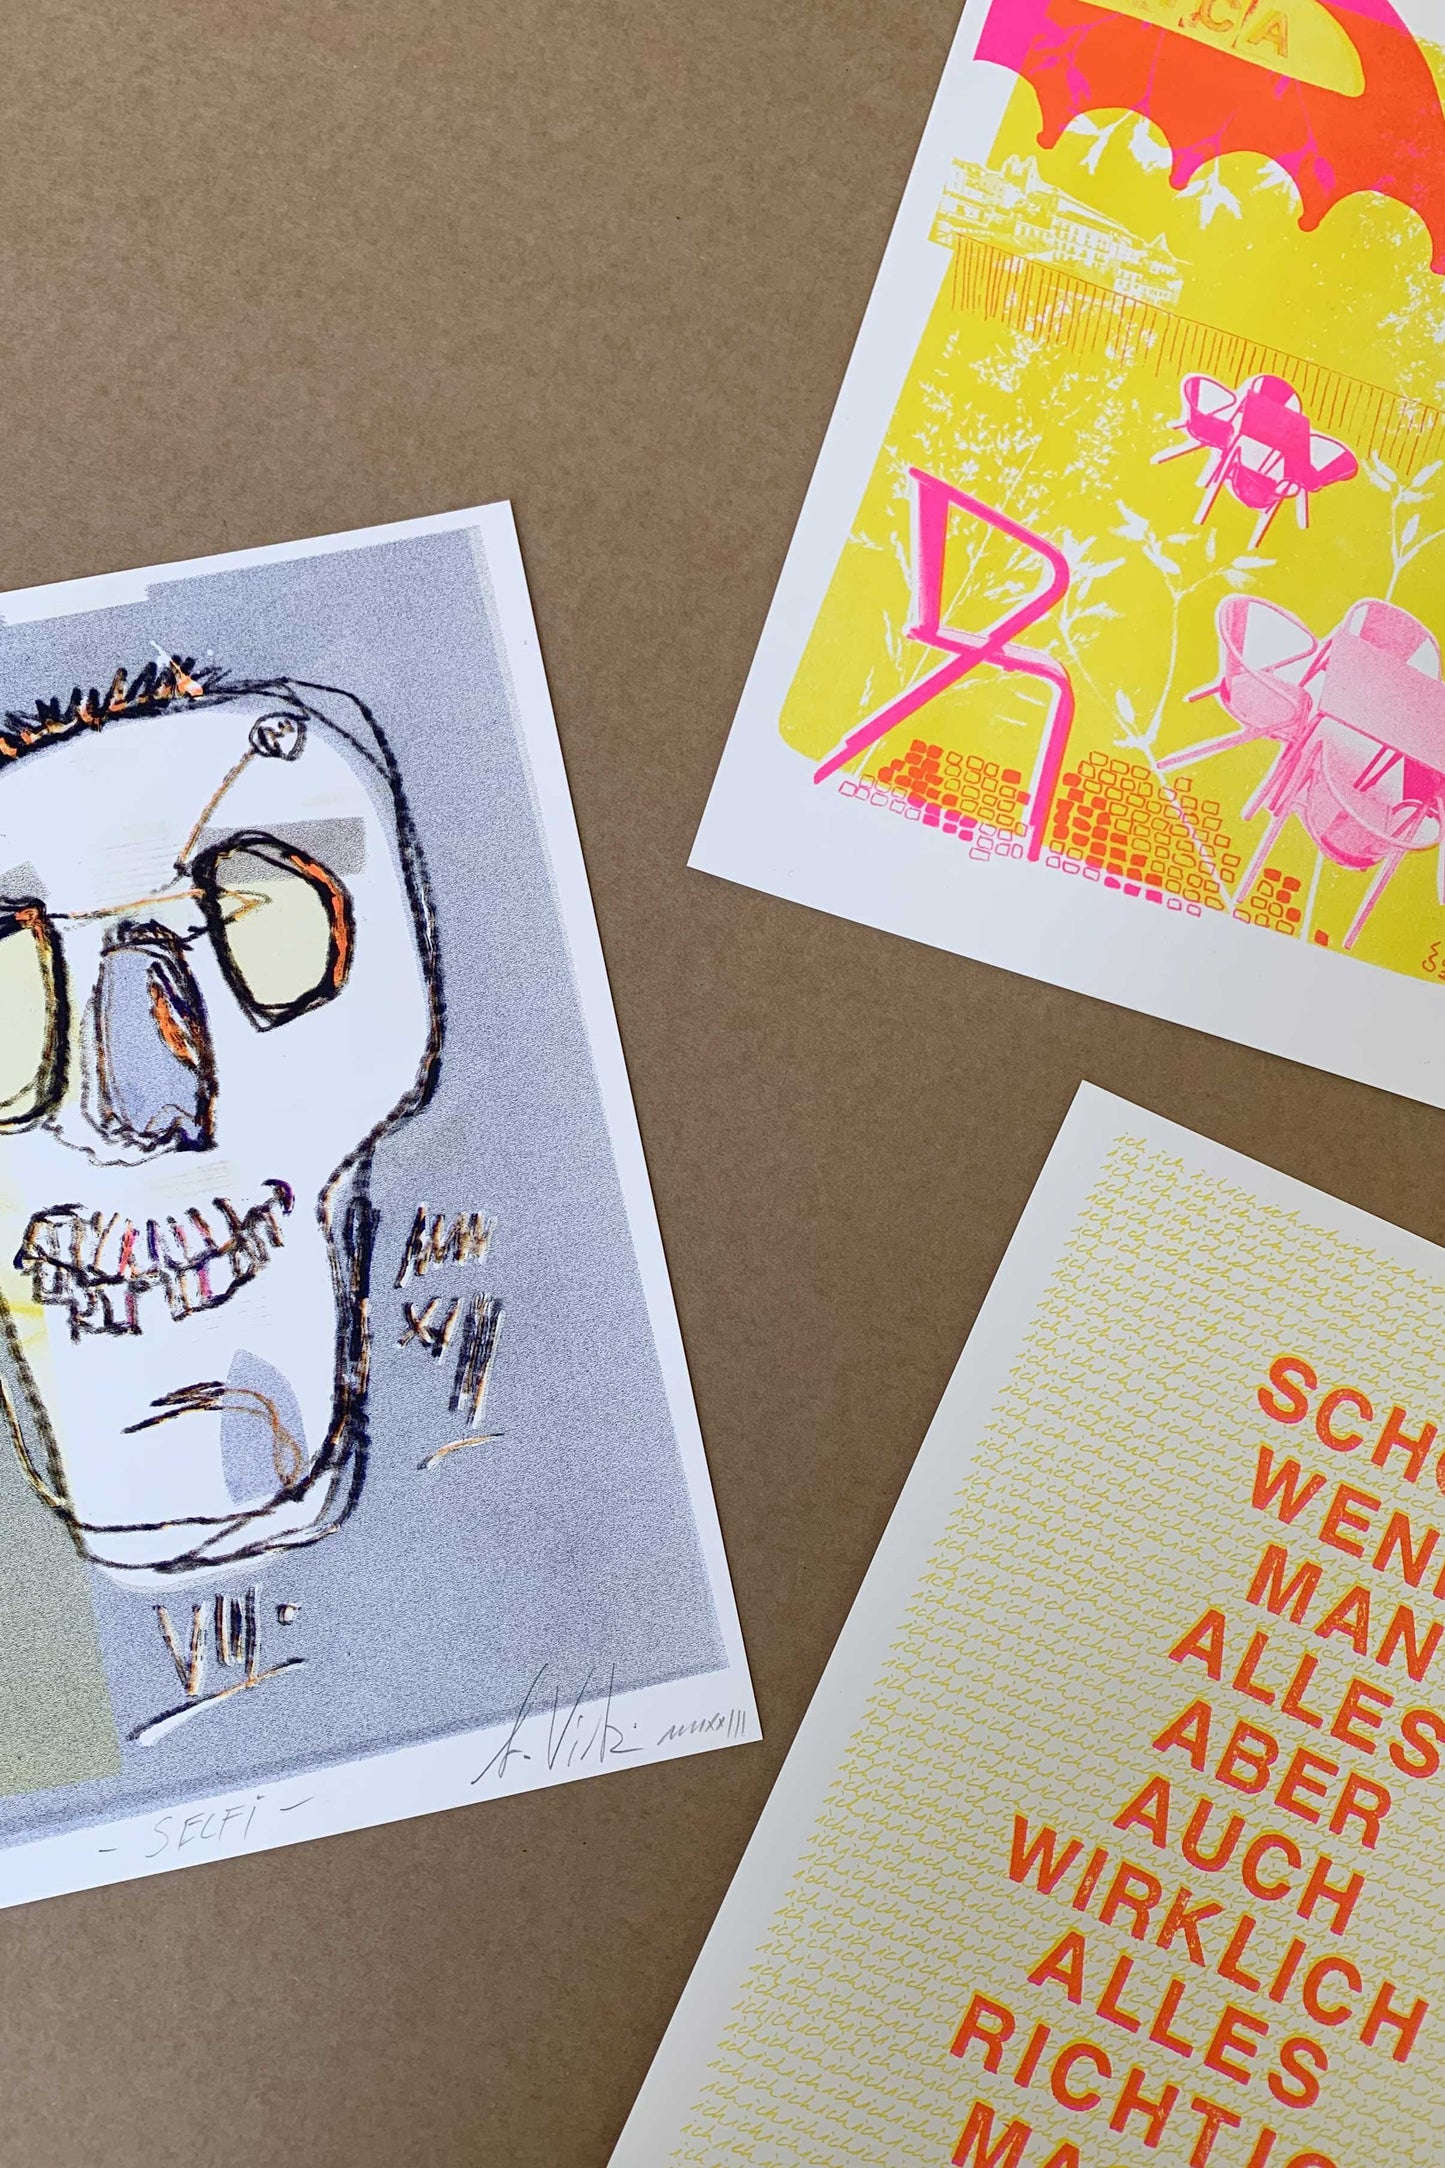 "Copy + Taste" – Risography Printing Workshop with Eva in Cologne, Germany